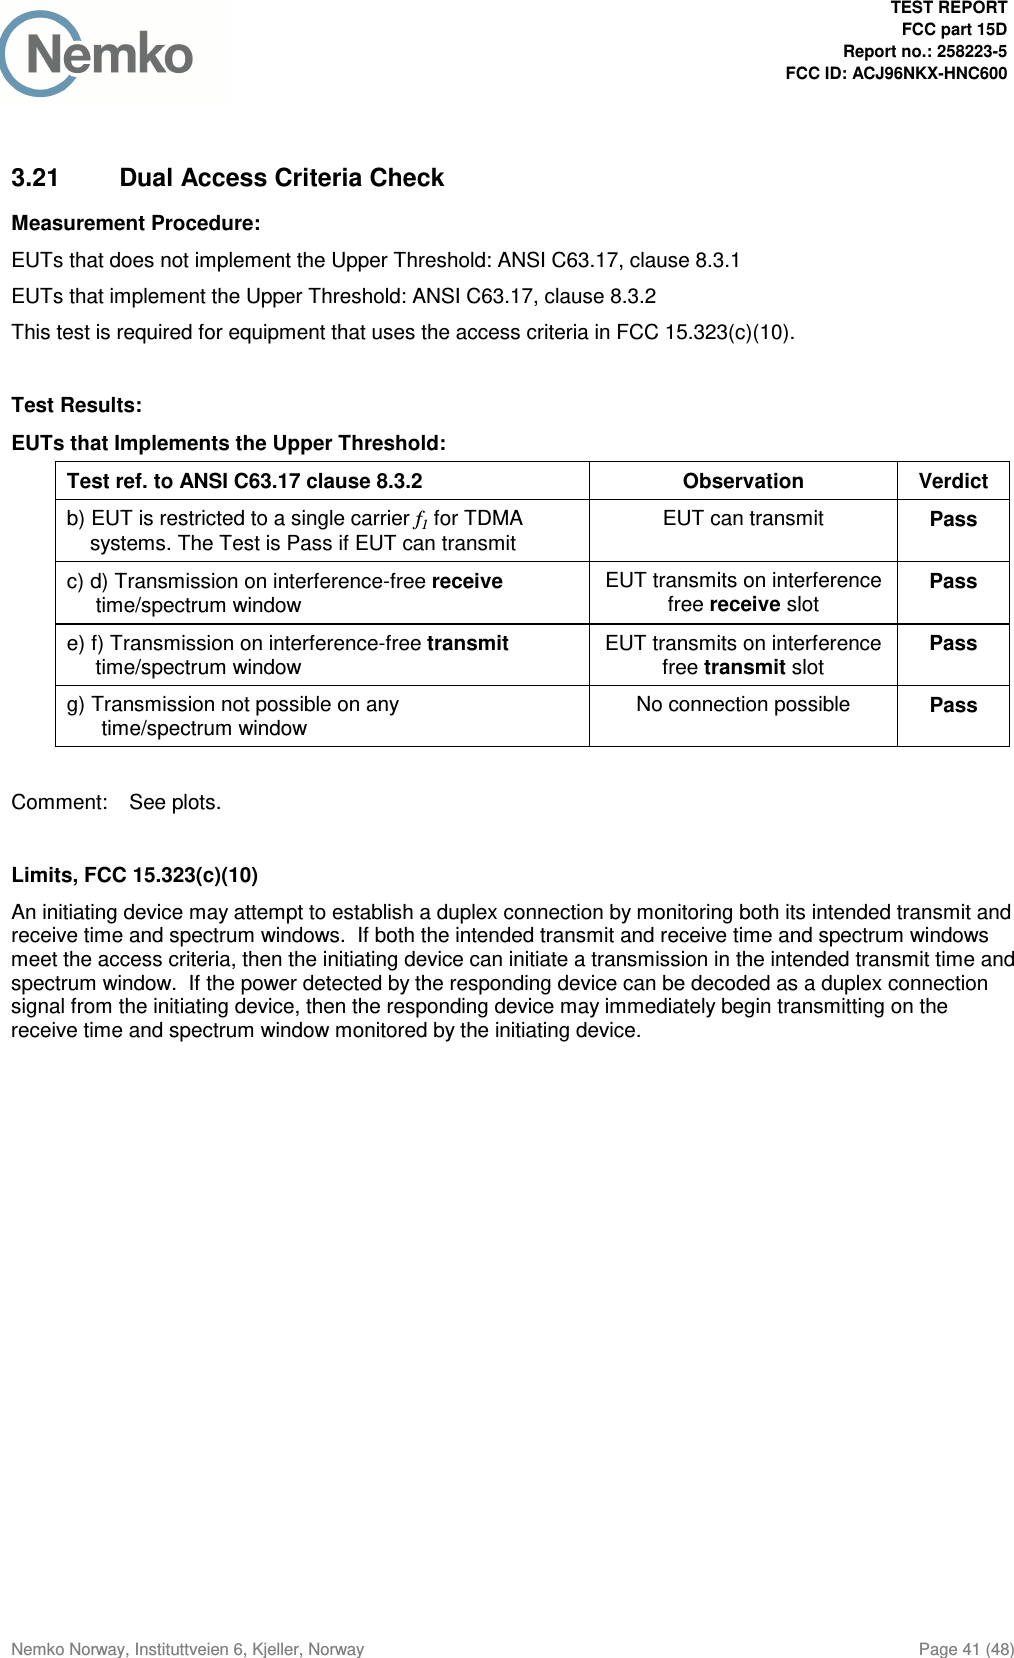  TEST REPORT  FCC part 15D Report no.: 258223-5 FCC ID: ACJ96NKX-HNC600  Nemko Norway, Instituttveien 6, Kjeller, Norway  Page 41 (48)  3.21  Dual Access Criteria Check Measurement Procedure: EUTs that does not implement the Upper Threshold: ANSI C63.17, clause 8.3.1 EUTs that implement the Upper Threshold: ANSI C63.17, clause 8.3.2 This test is required for equipment that uses the access criteria in FCC 15.323(c)(10).  Test Results: EUTs that Implements the Upper Threshold: Test ref. to ANSI C63.17 clause 8.3.2  Observation  Verdict b) EUT is restricted to a single carrier f1 for TDMA     systems. The Test is Pass if EUT can transmit EUT can transmit  Pass c) d) Transmission on interference-free receive      time/spectrum window  EUT transmits on interference free receive slot Pass e) f) Transmission on interference-free transmit      time/spectrum window  EUT transmits on interference free transmit slot Pass g) Transmission not possible on any       time/spectrum window No connection possible  Pass  Comment:  See plots.  Limits, FCC 15.323(c)(10) An initiating device may attempt to establish a duplex connection by monitoring both its intended transmit and receive time and spectrum windows.  If both the intended transmit and receive time and spectrum windows meet the access criteria, then the initiating device can initiate a transmission in the intended transmit time and spectrum window.  If the power detected by the responding device can be decoded as a duplex connection signal from the initiating device, then the responding device may immediately begin transmitting on the receive time and spectrum window monitored by the initiating device.  